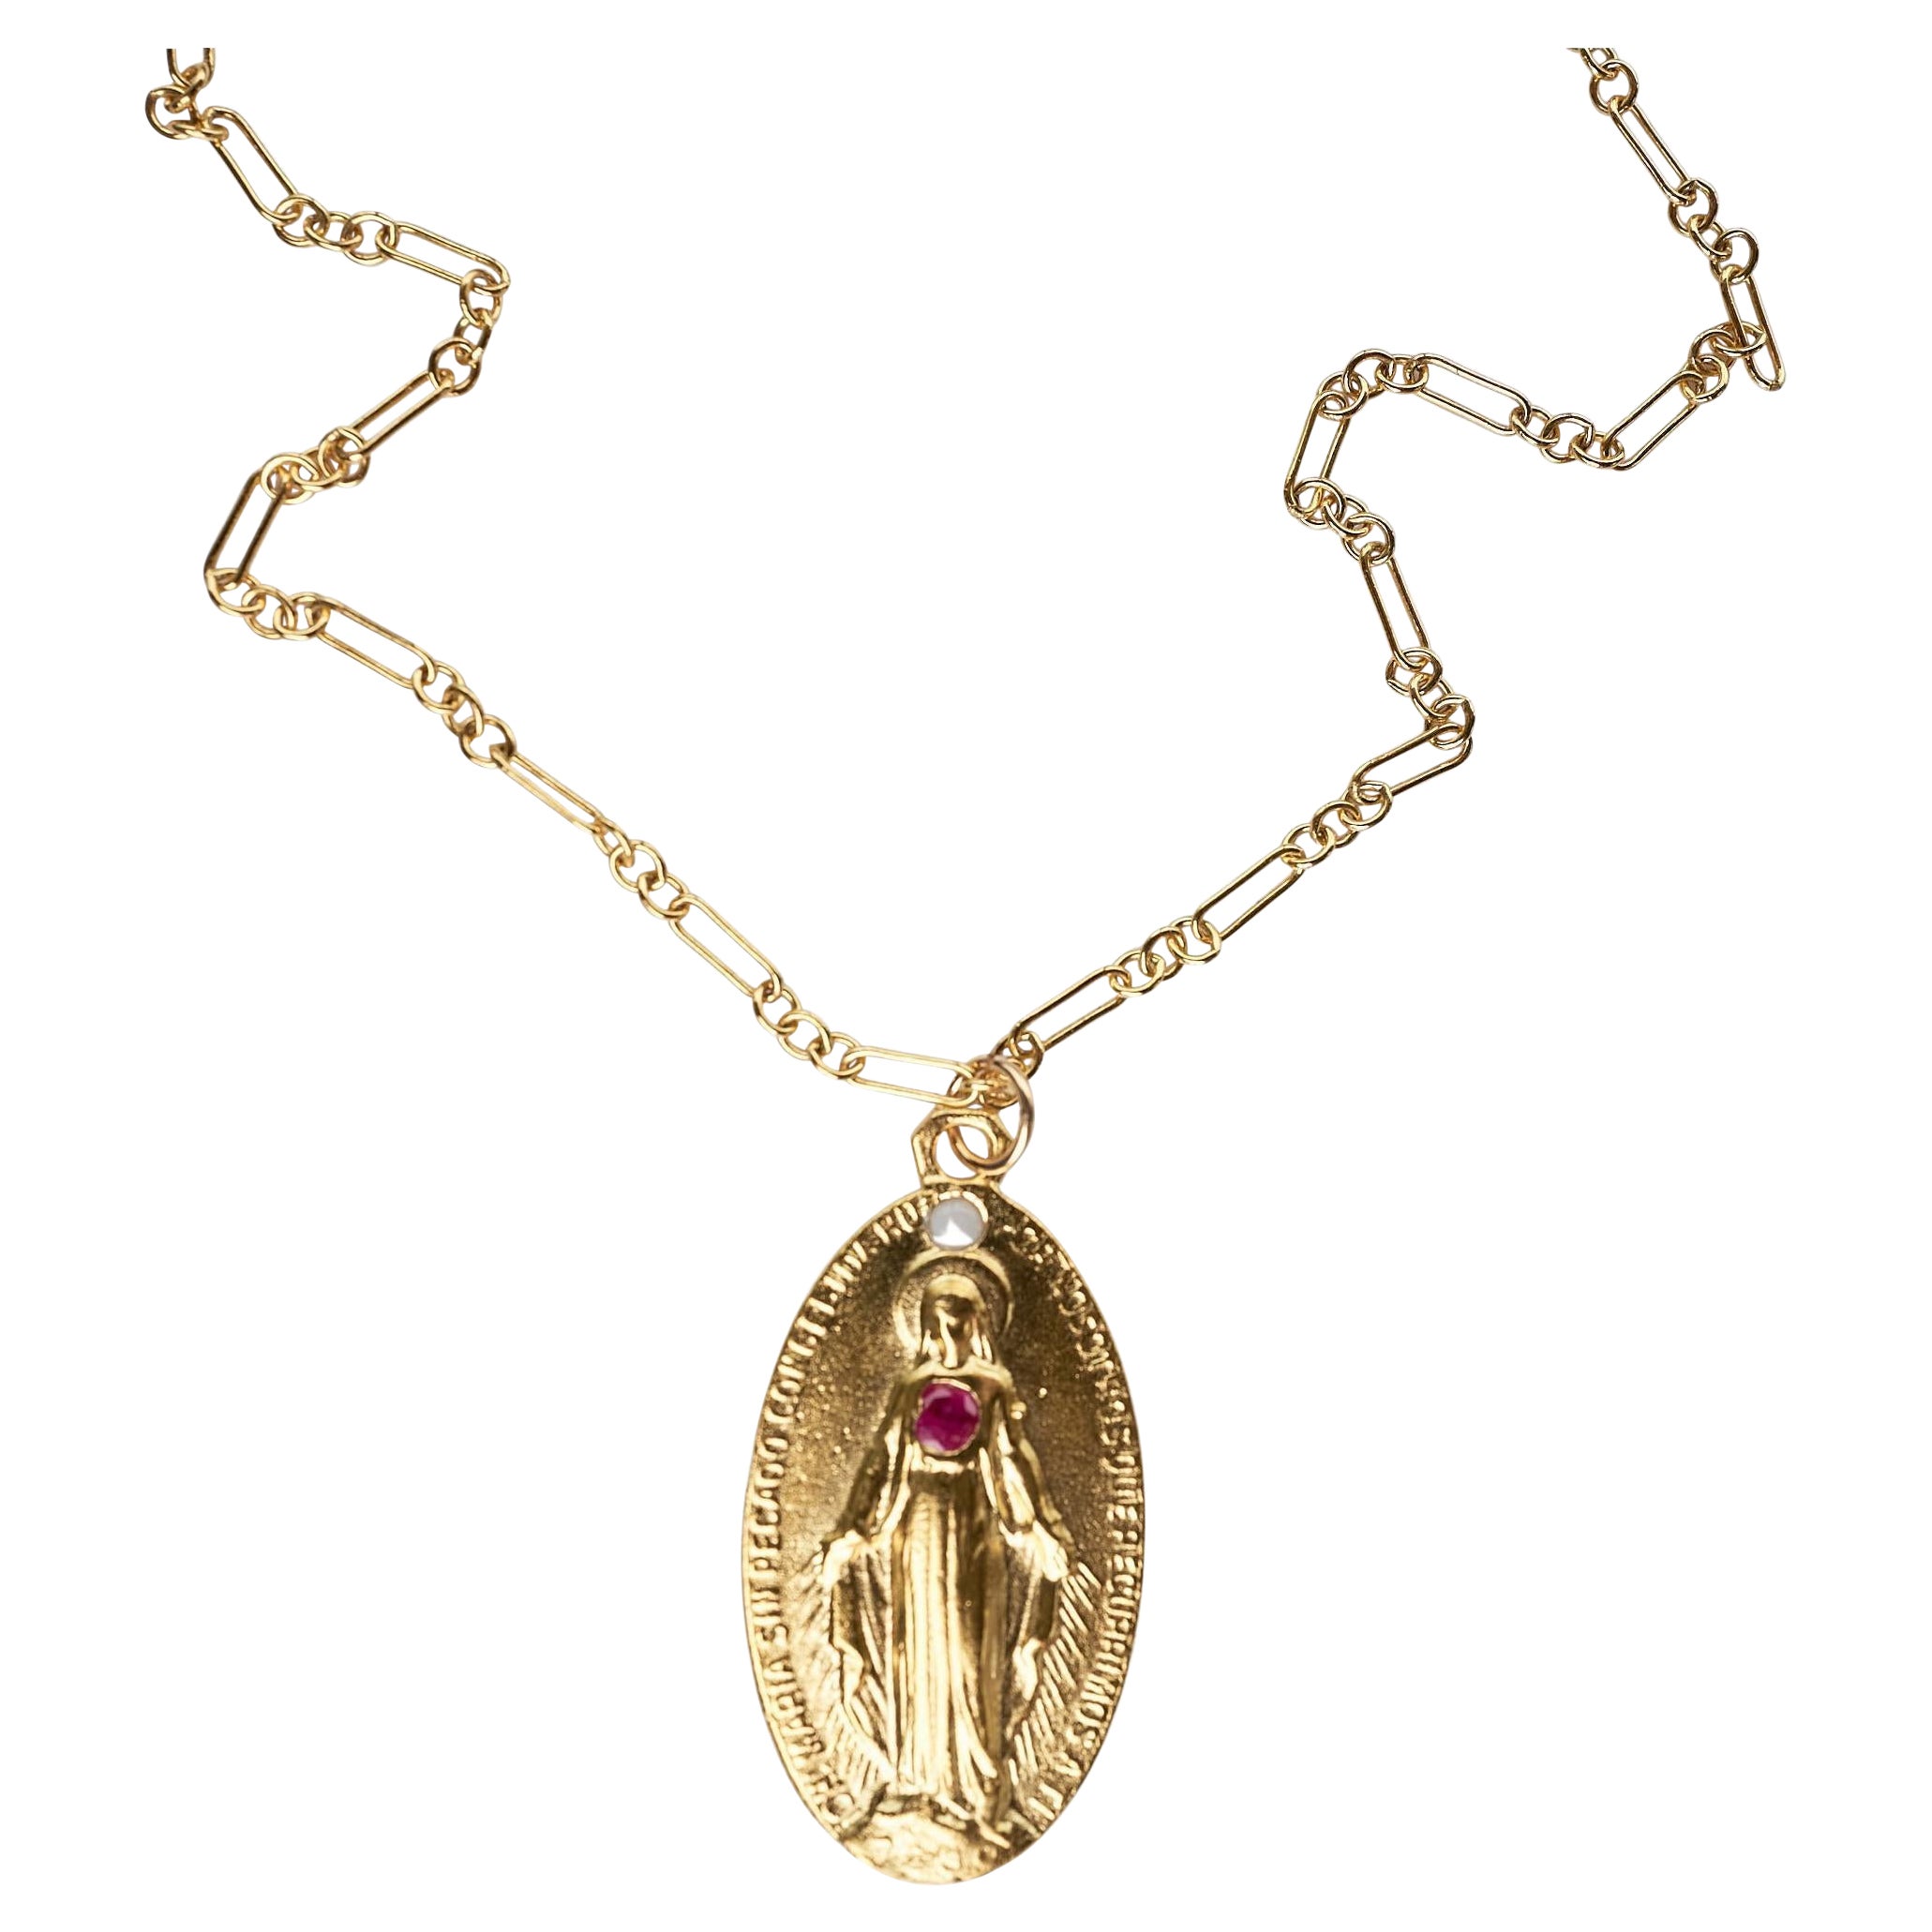 Ruby Opal Medal Virgin Mary Chain Necklace
Designer: J Dauphin
14k Gold Plated Brass Medal and Gold Filled Chain 28